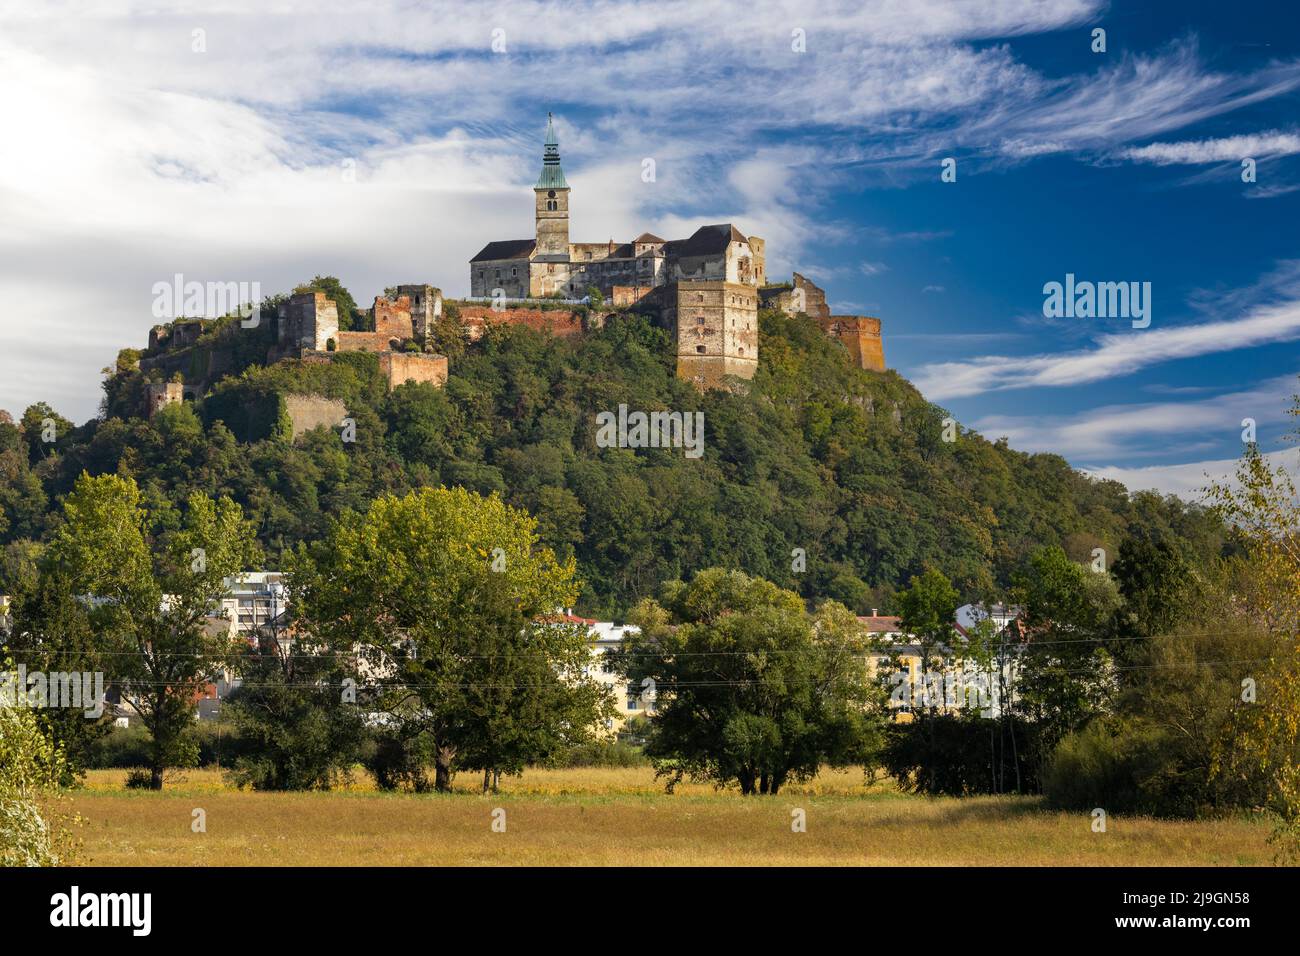 Gussing castle, Southern Burgenland, Austria Stock Photo